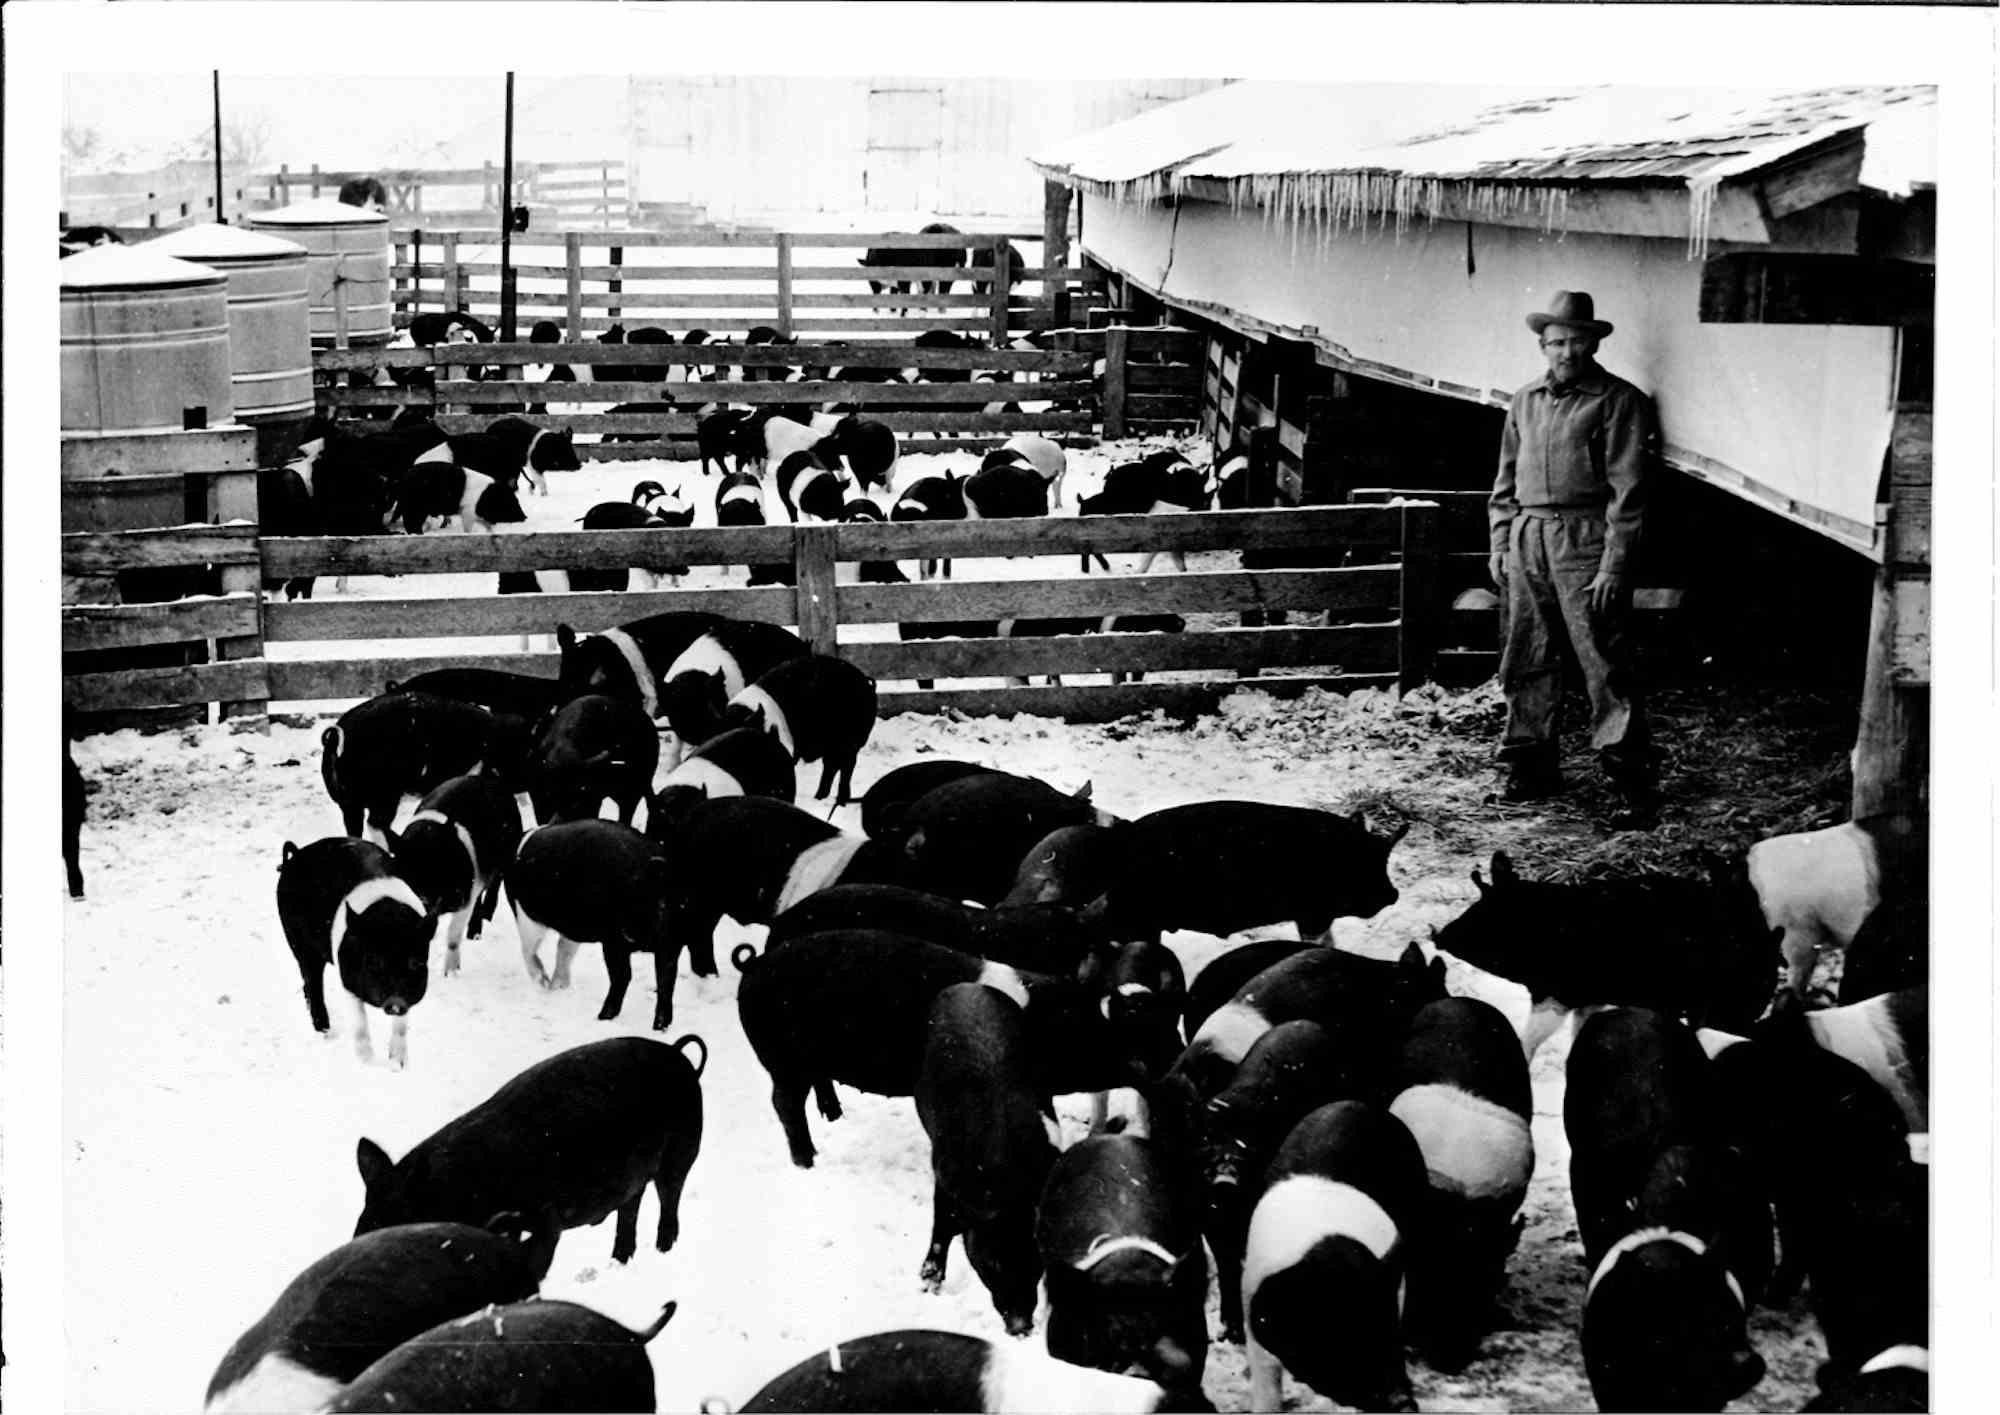 Unknown Figurative Photograph - Agricultural Production - American Vintage Photograph - Mid 20th Century